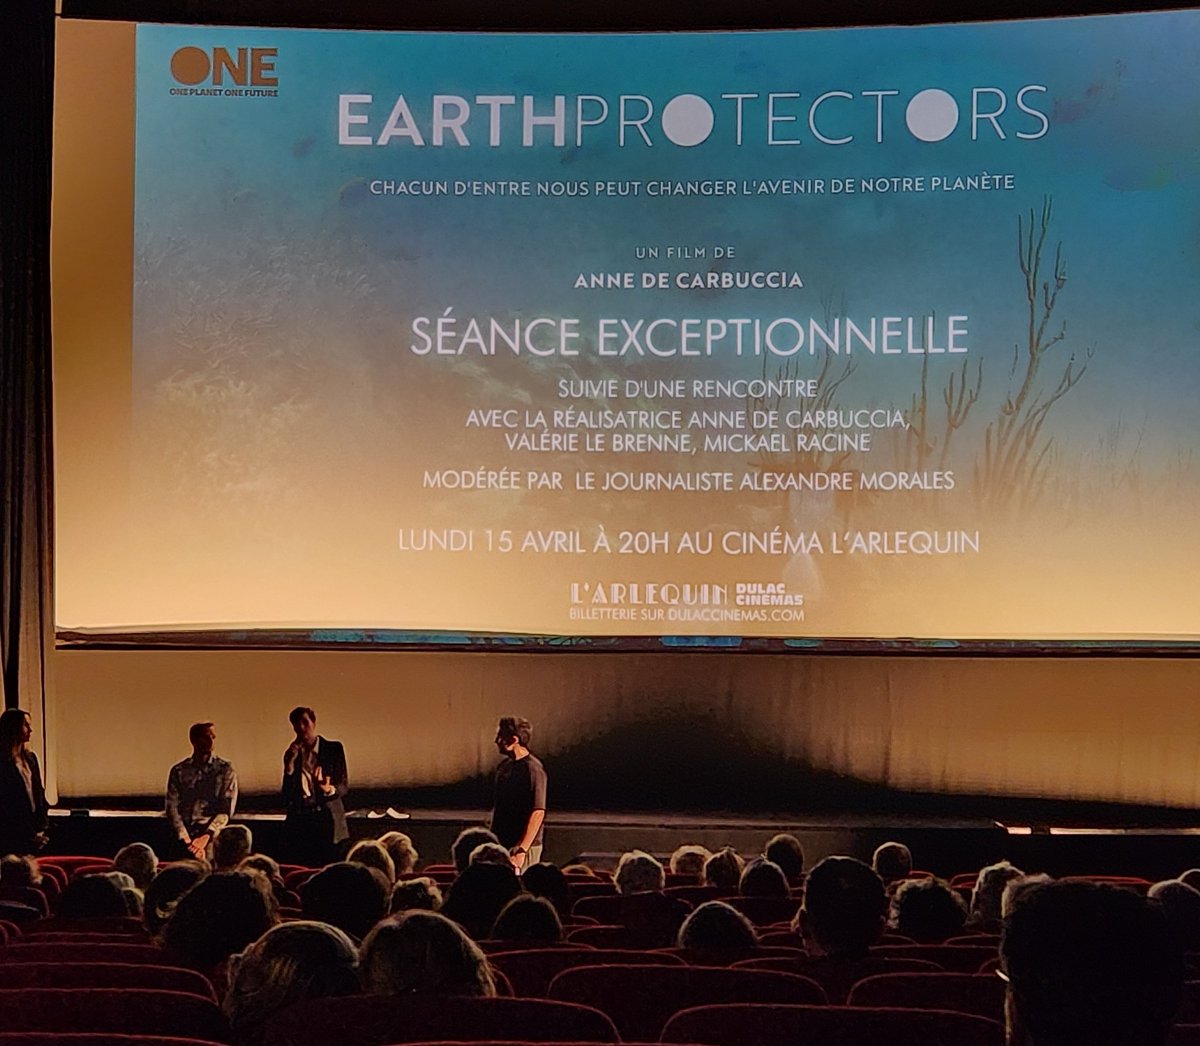 Congrats to Anne de Carbuccia on the launch of her documentary #EarthProtectors in France. 
#OnePlanetOneFuture.